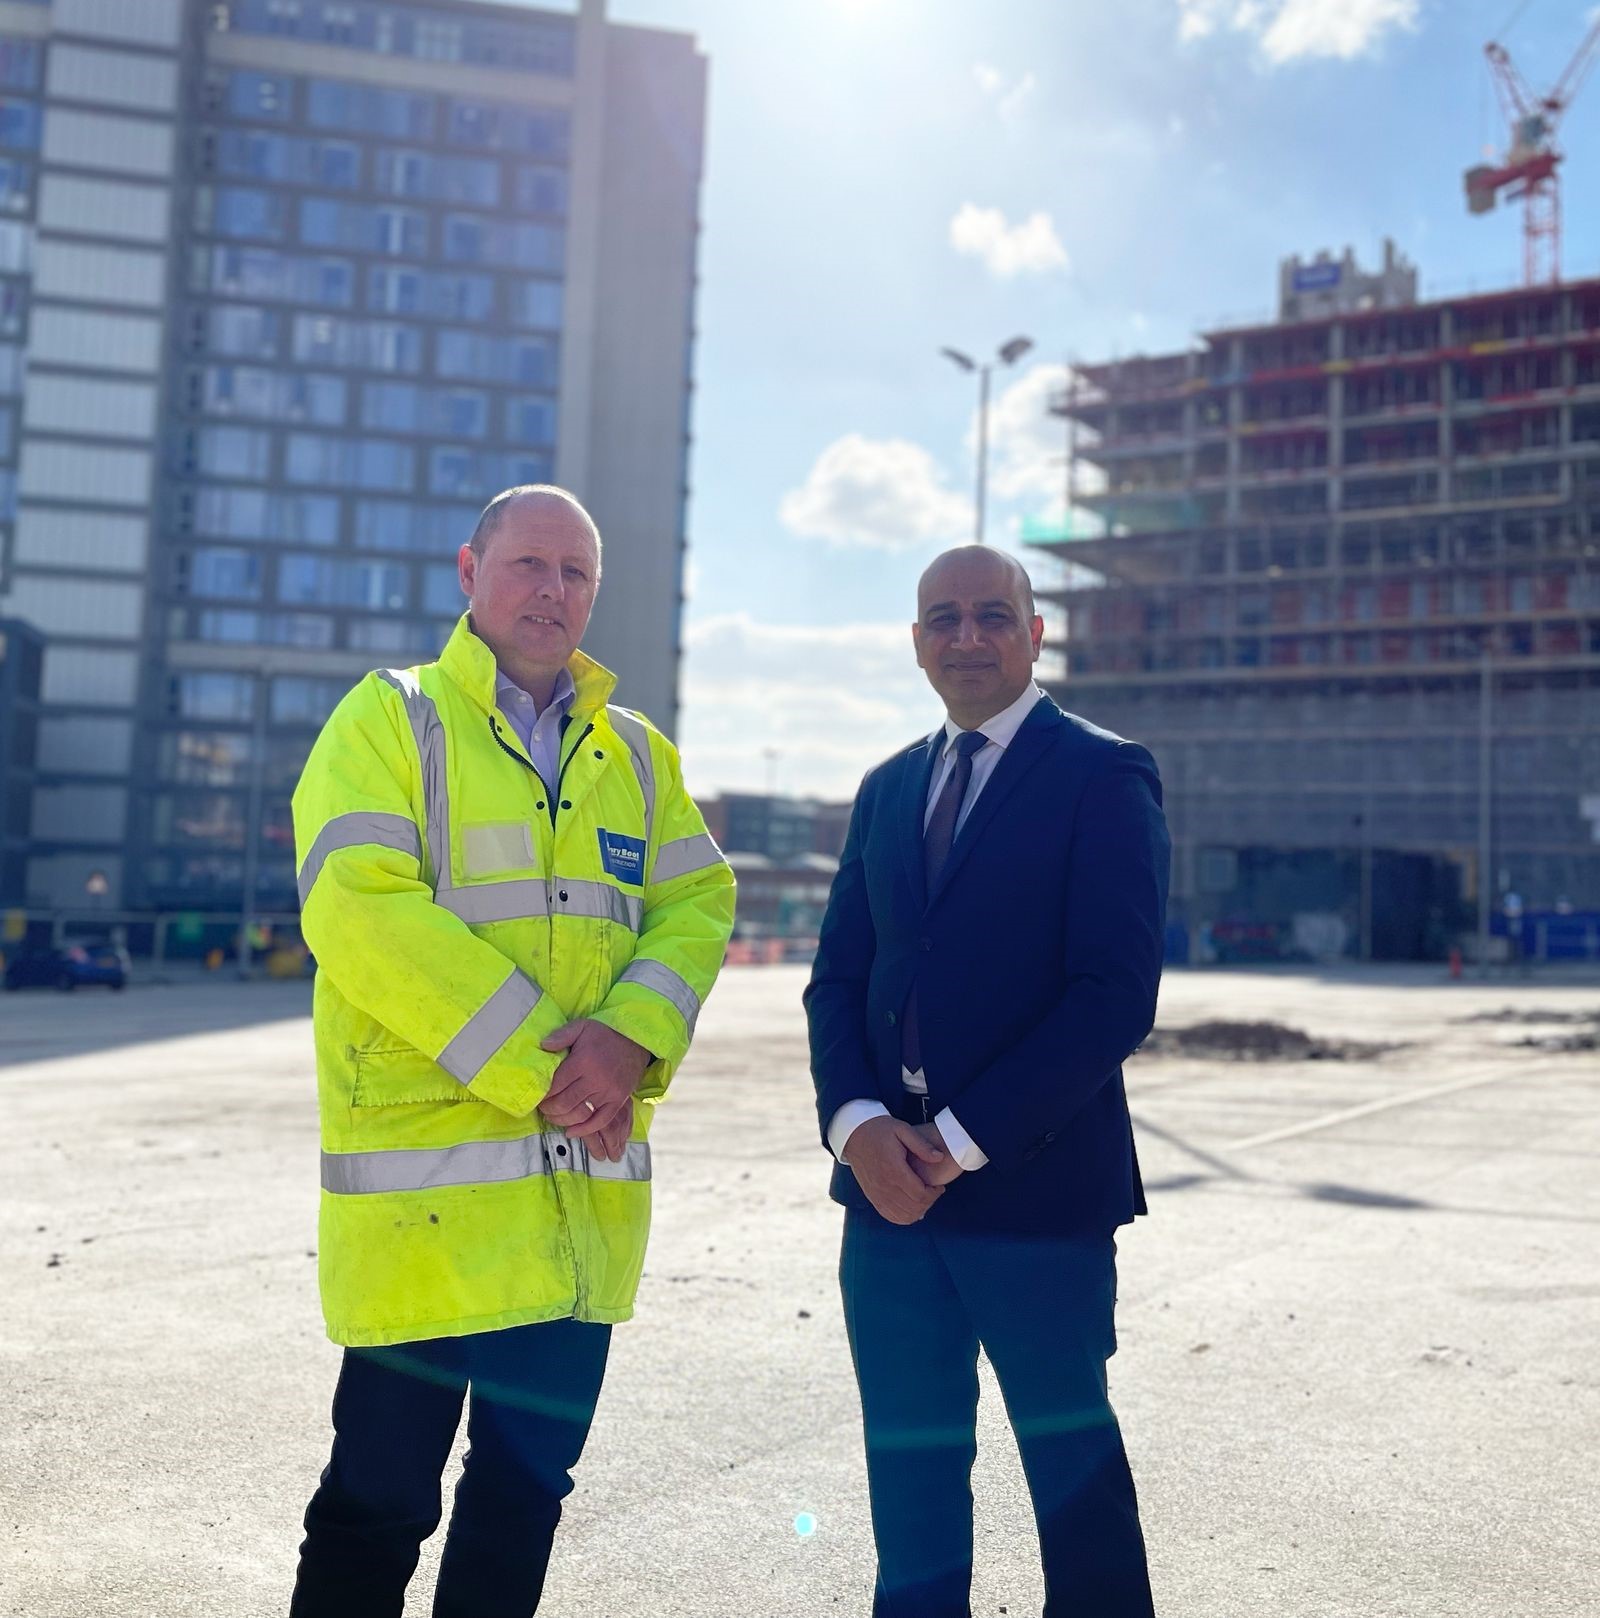 Two men stood on construction site, one in high vis, one in a suit. 